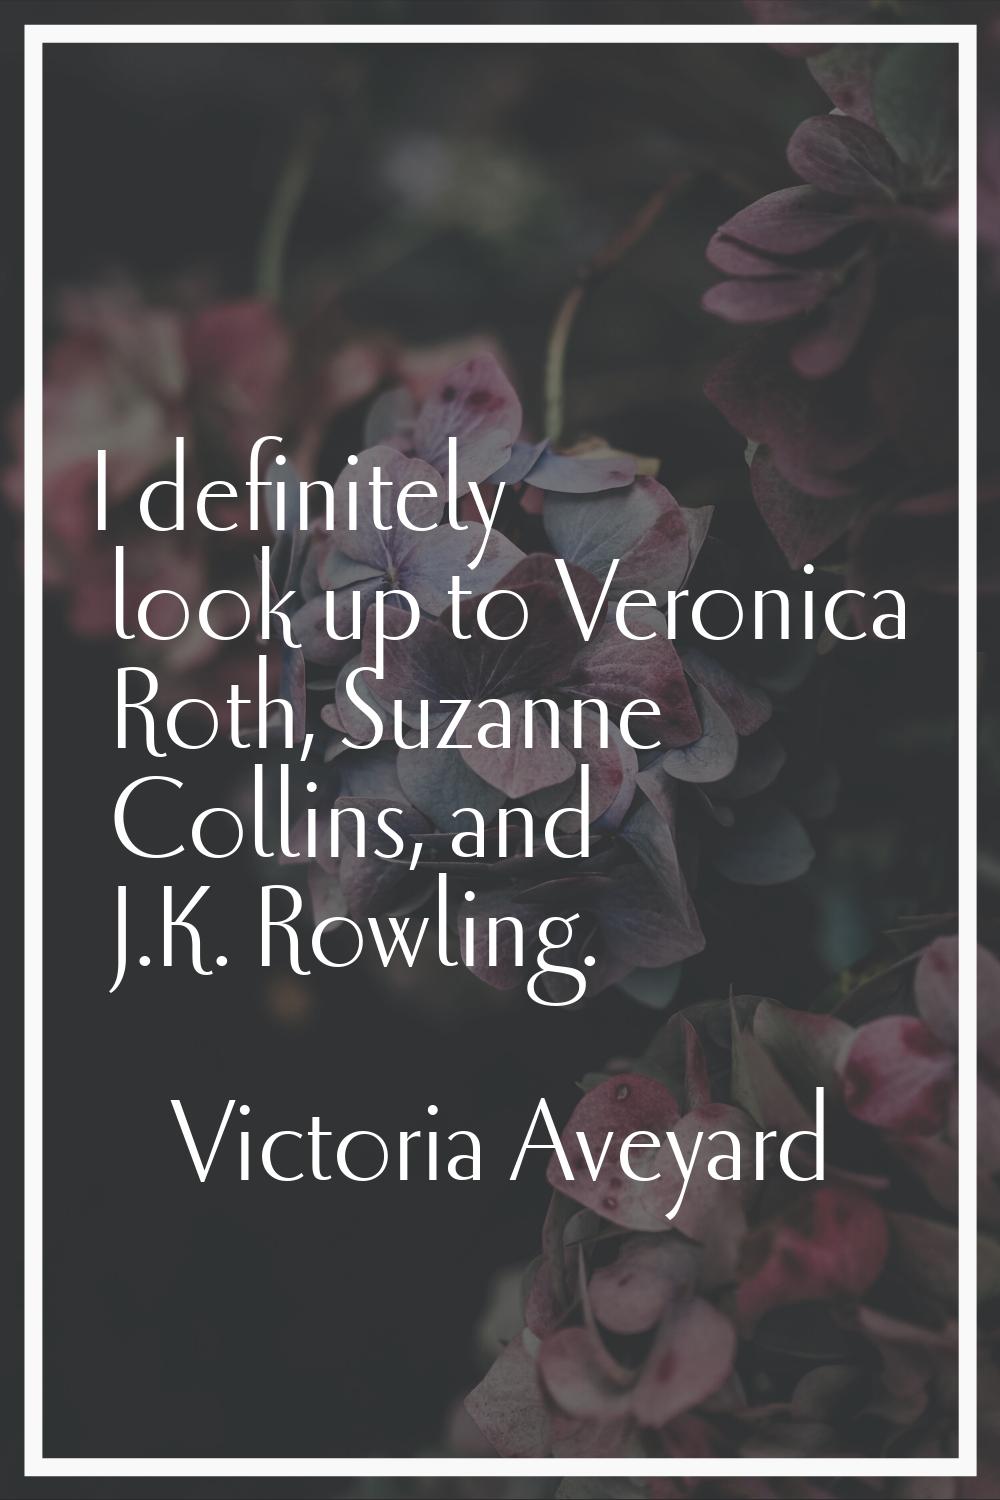 I definitely look up to Veronica Roth, Suzanne Collins, and J.K. Rowling.